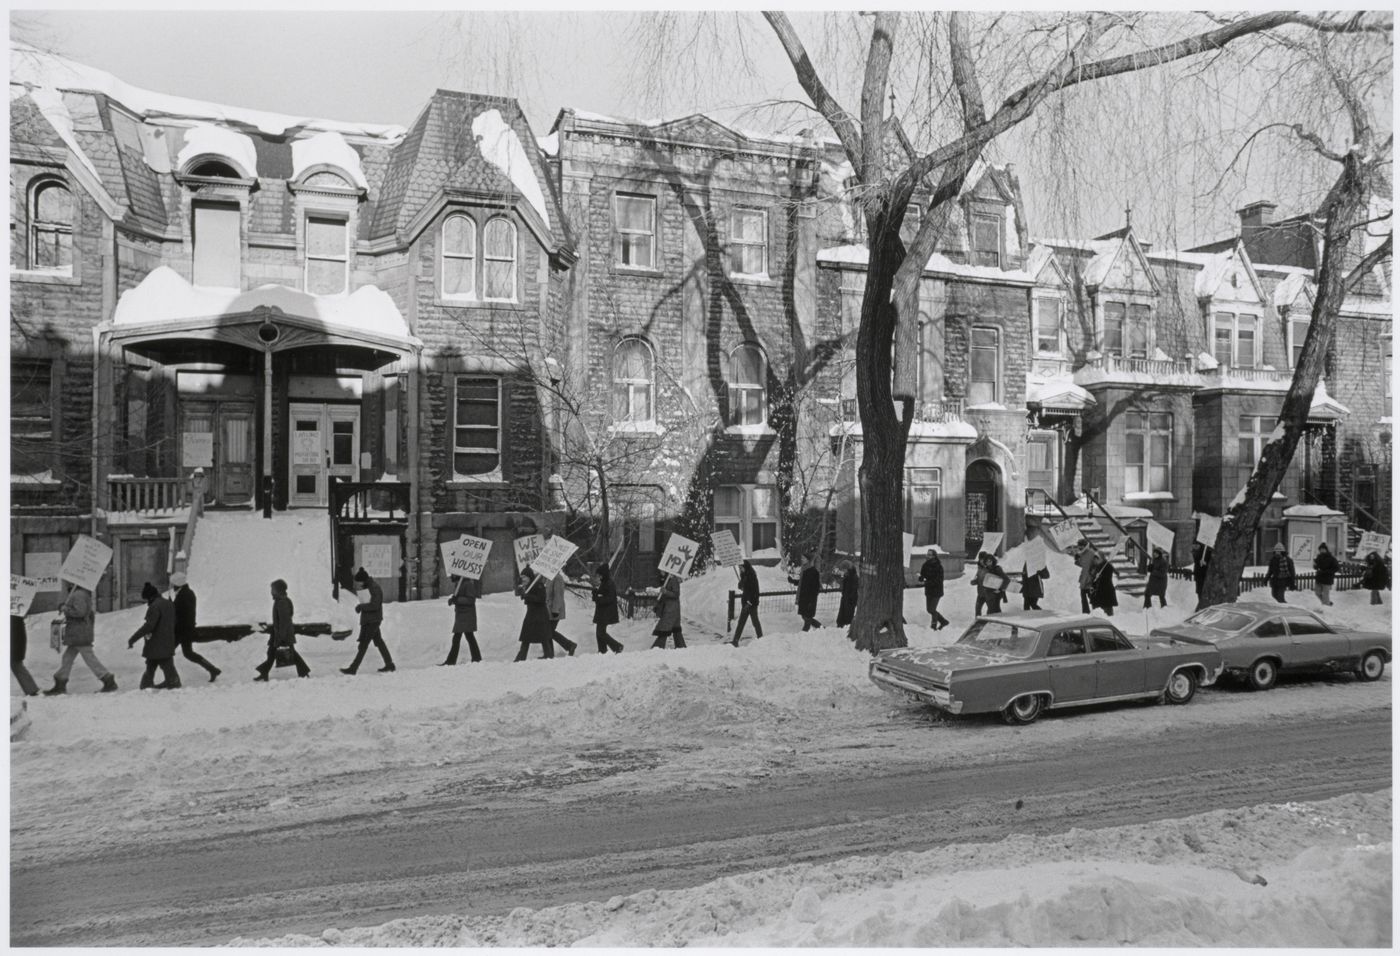 Milton Park Citizen's Committee demonstration in front of closed houses on Hutchison Street, Montréal, Québec